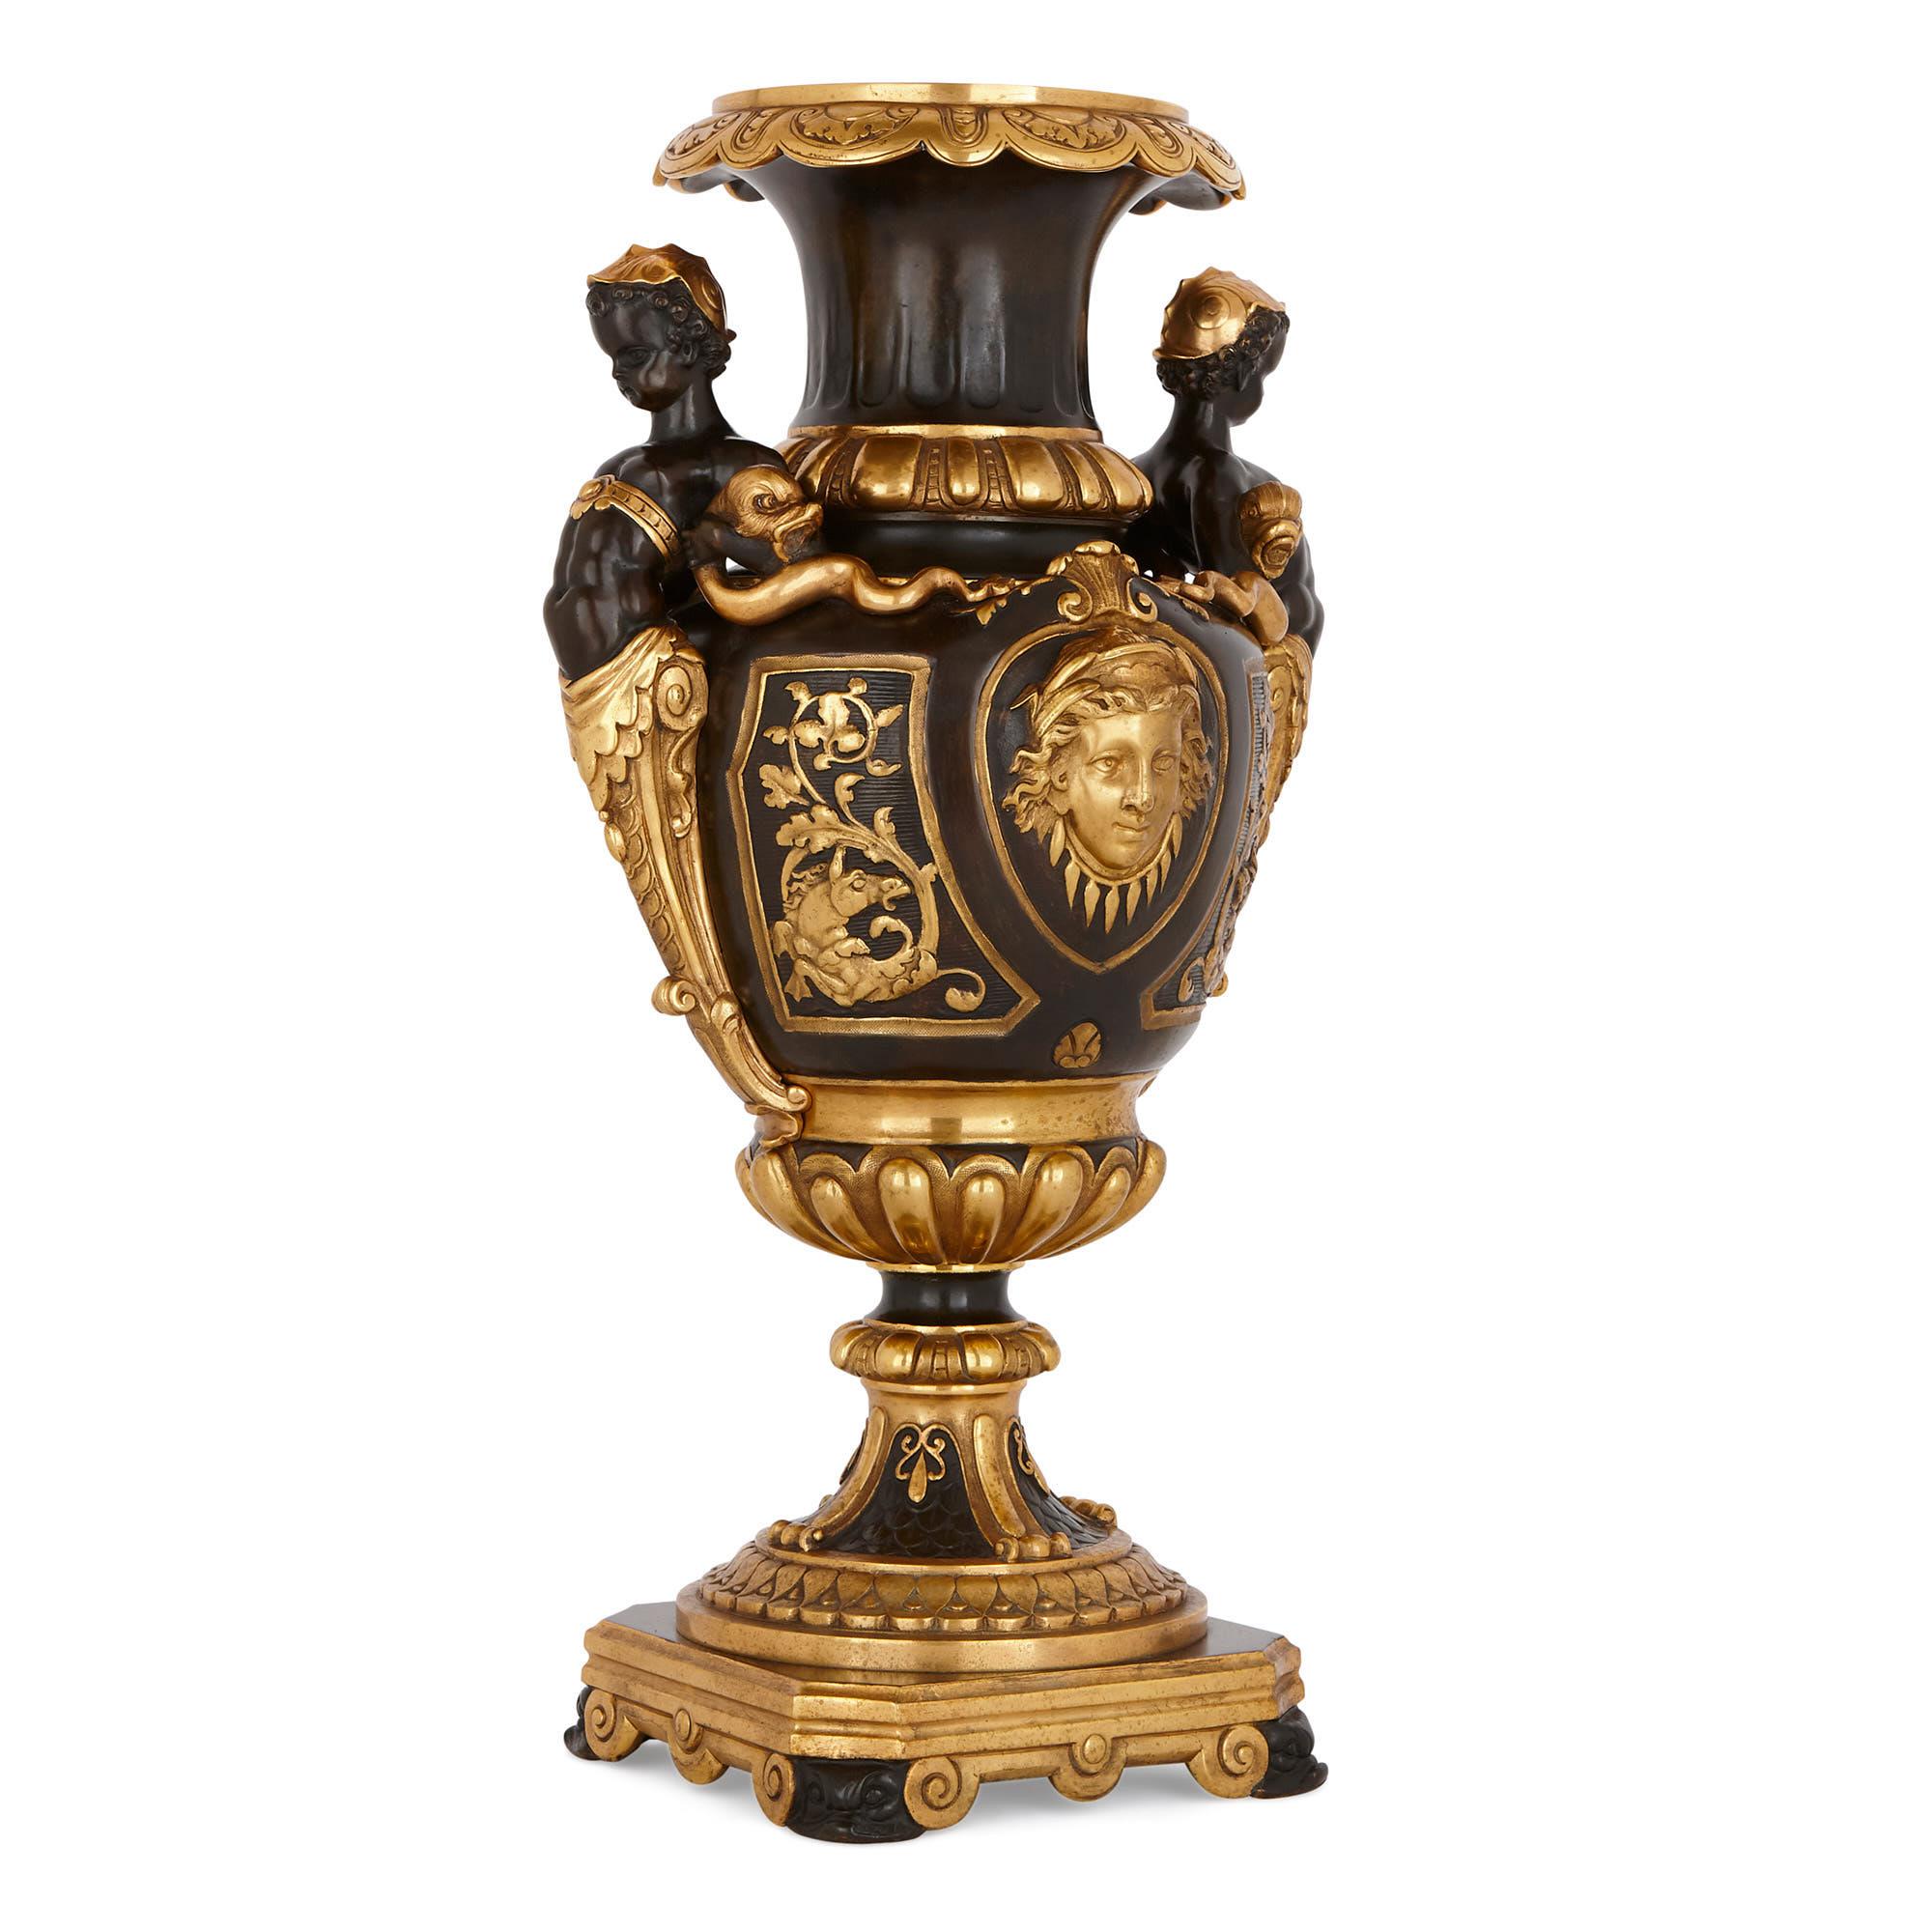 This vase is a truly beautiful antique piece, which is finely decorated with sea-themed motifs. The vase’s ovoid body is topped by a neck with a flared mouth. The patinated bronze neck is encircled, at its base, by a gilt bronze gadrooned belt, and